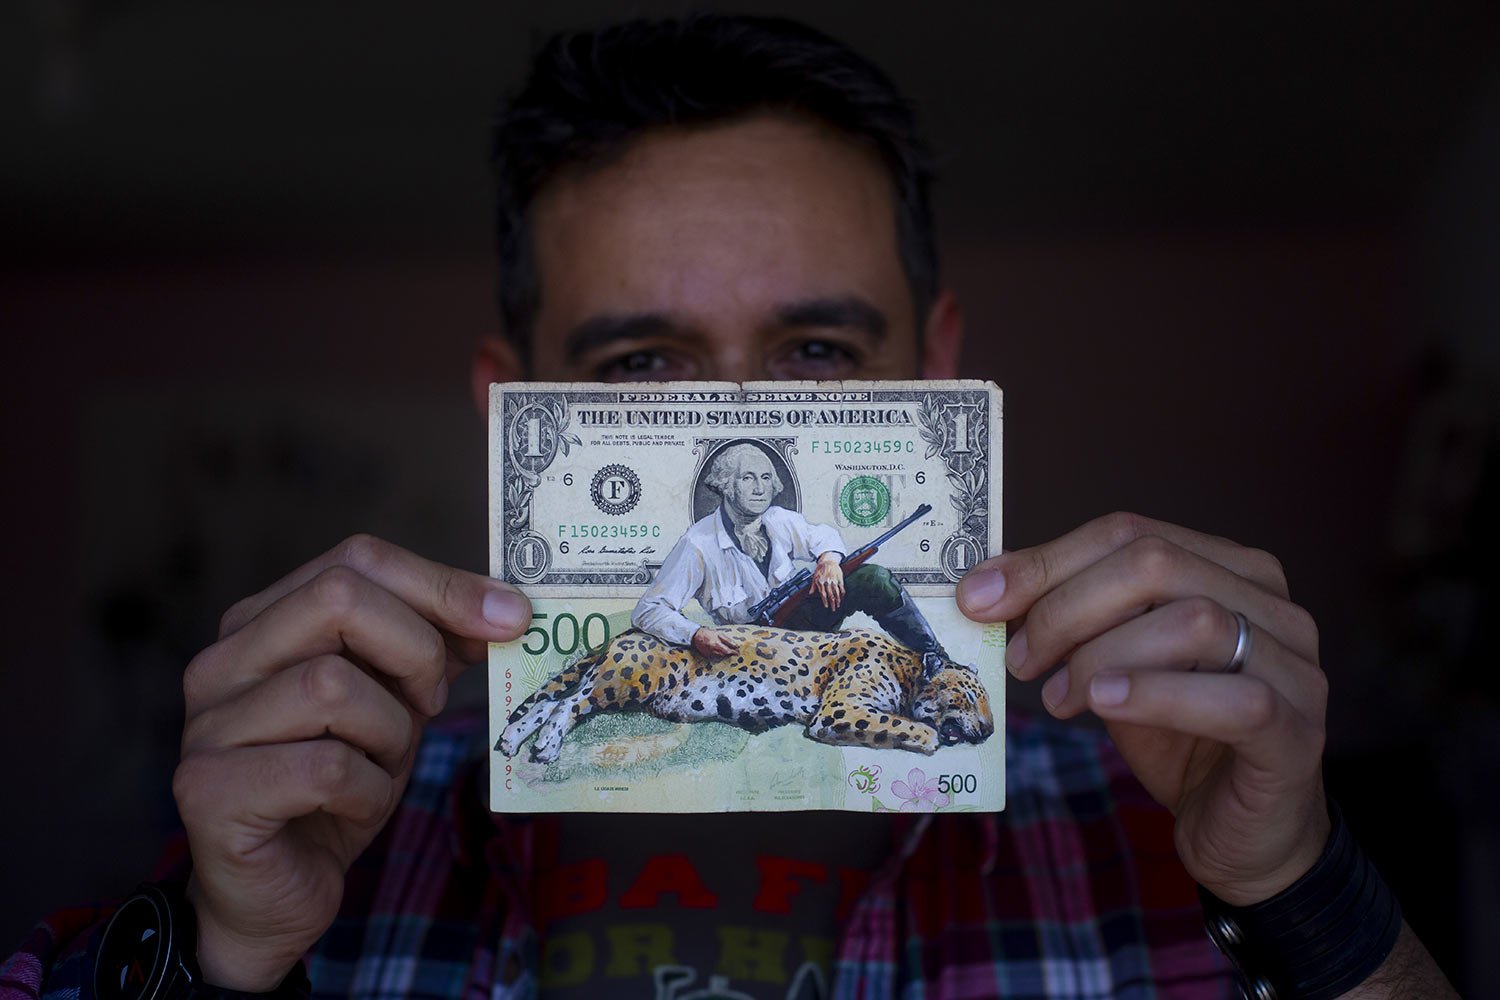  Artist Sergio Díaz holds up a piece of his money art featuring a U.S. dollar and an Argentine 500-peso note with former U.S. President George Washington holding a rifle alongside a dead jaguar, at his studio in Salta, Argentina, Sept. 9, 2023. As mi